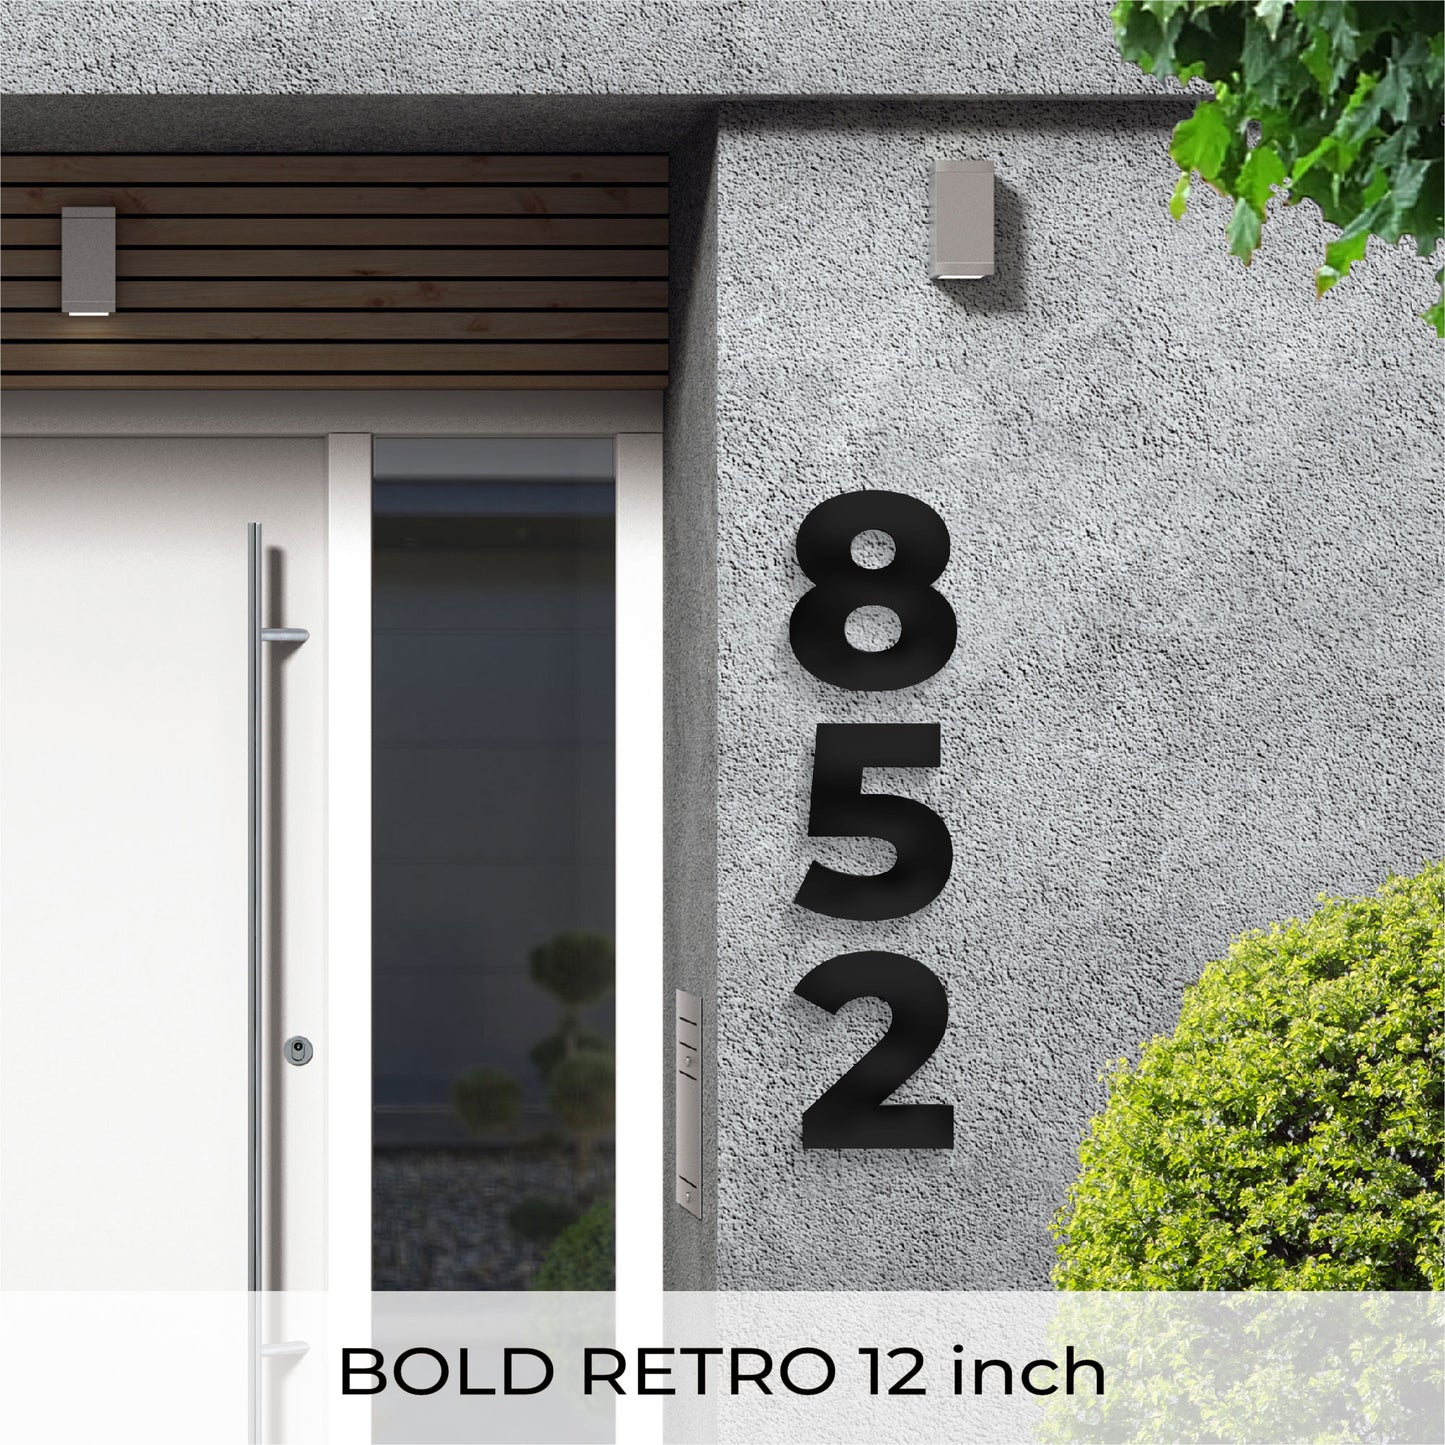 BOLD RETRO house numbers for an address that stands out